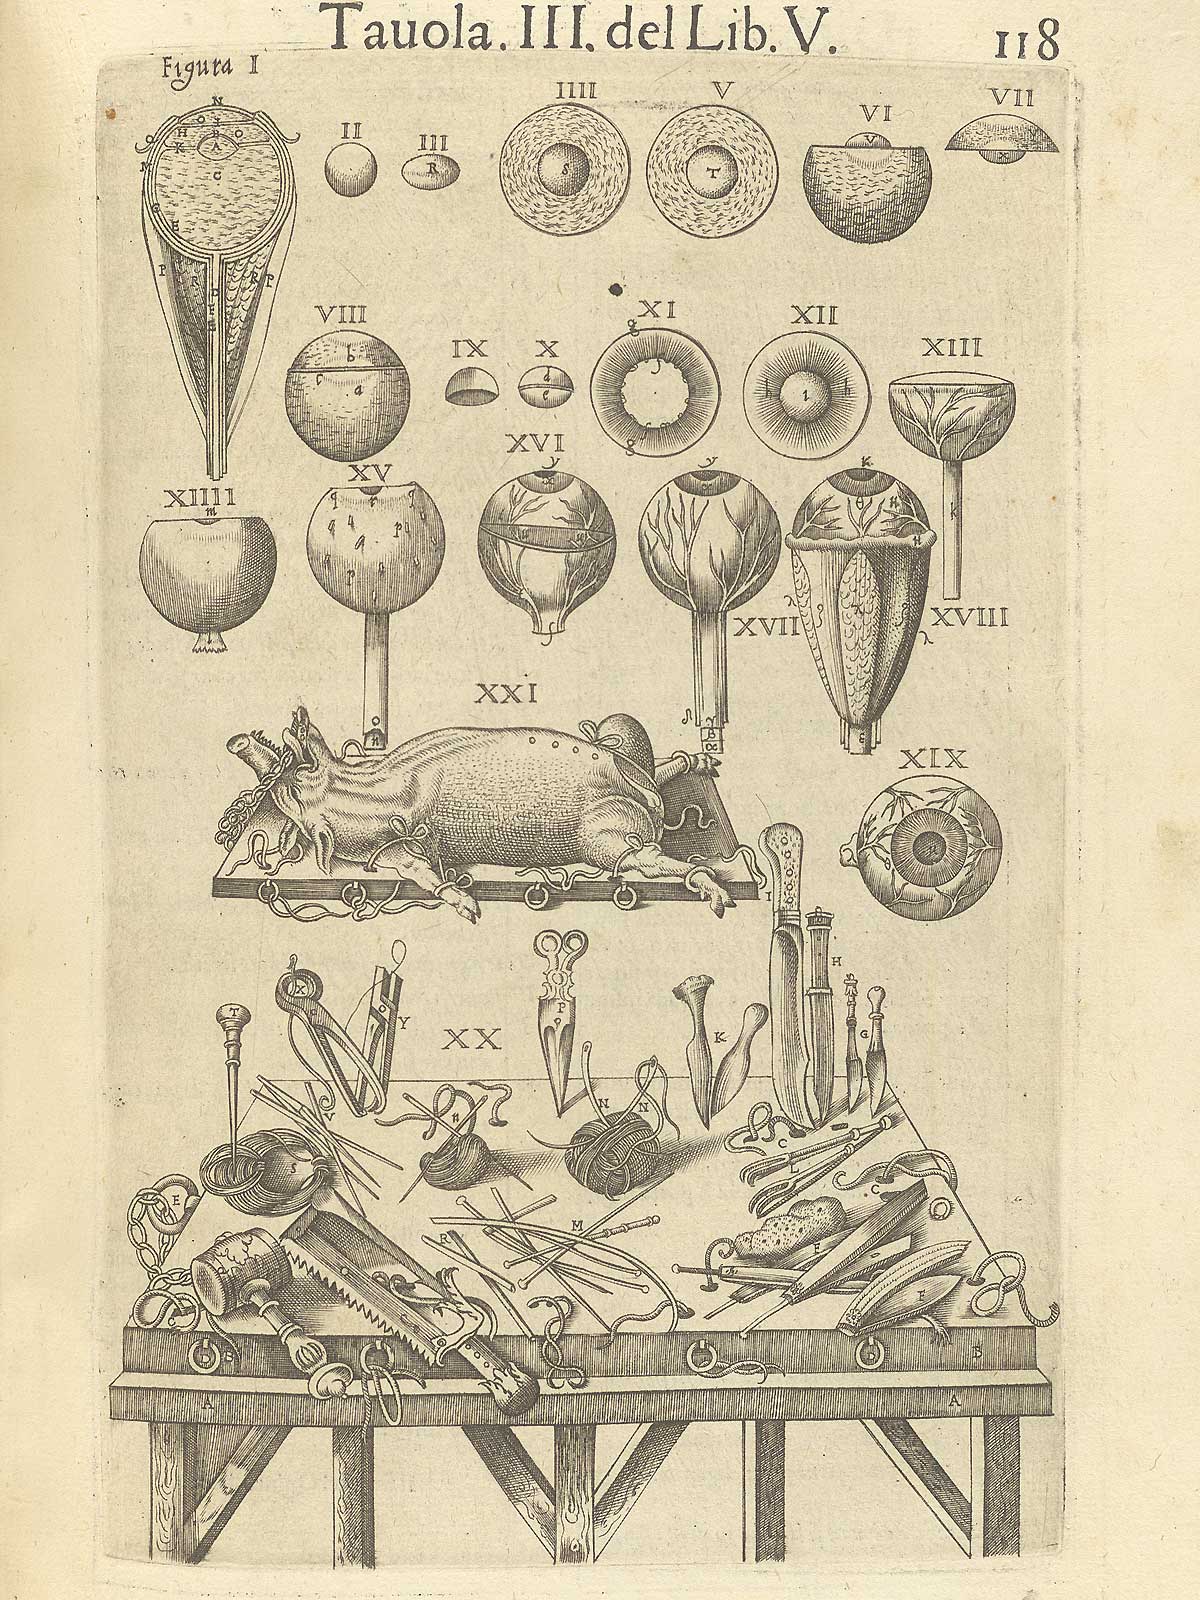 Page 118 of Juan Valverde de Amusco's Anatomia del corpo humano, featuring various images of the eye, a swine that is ready to be dissected and the various instruments that would be used to do the dissection.